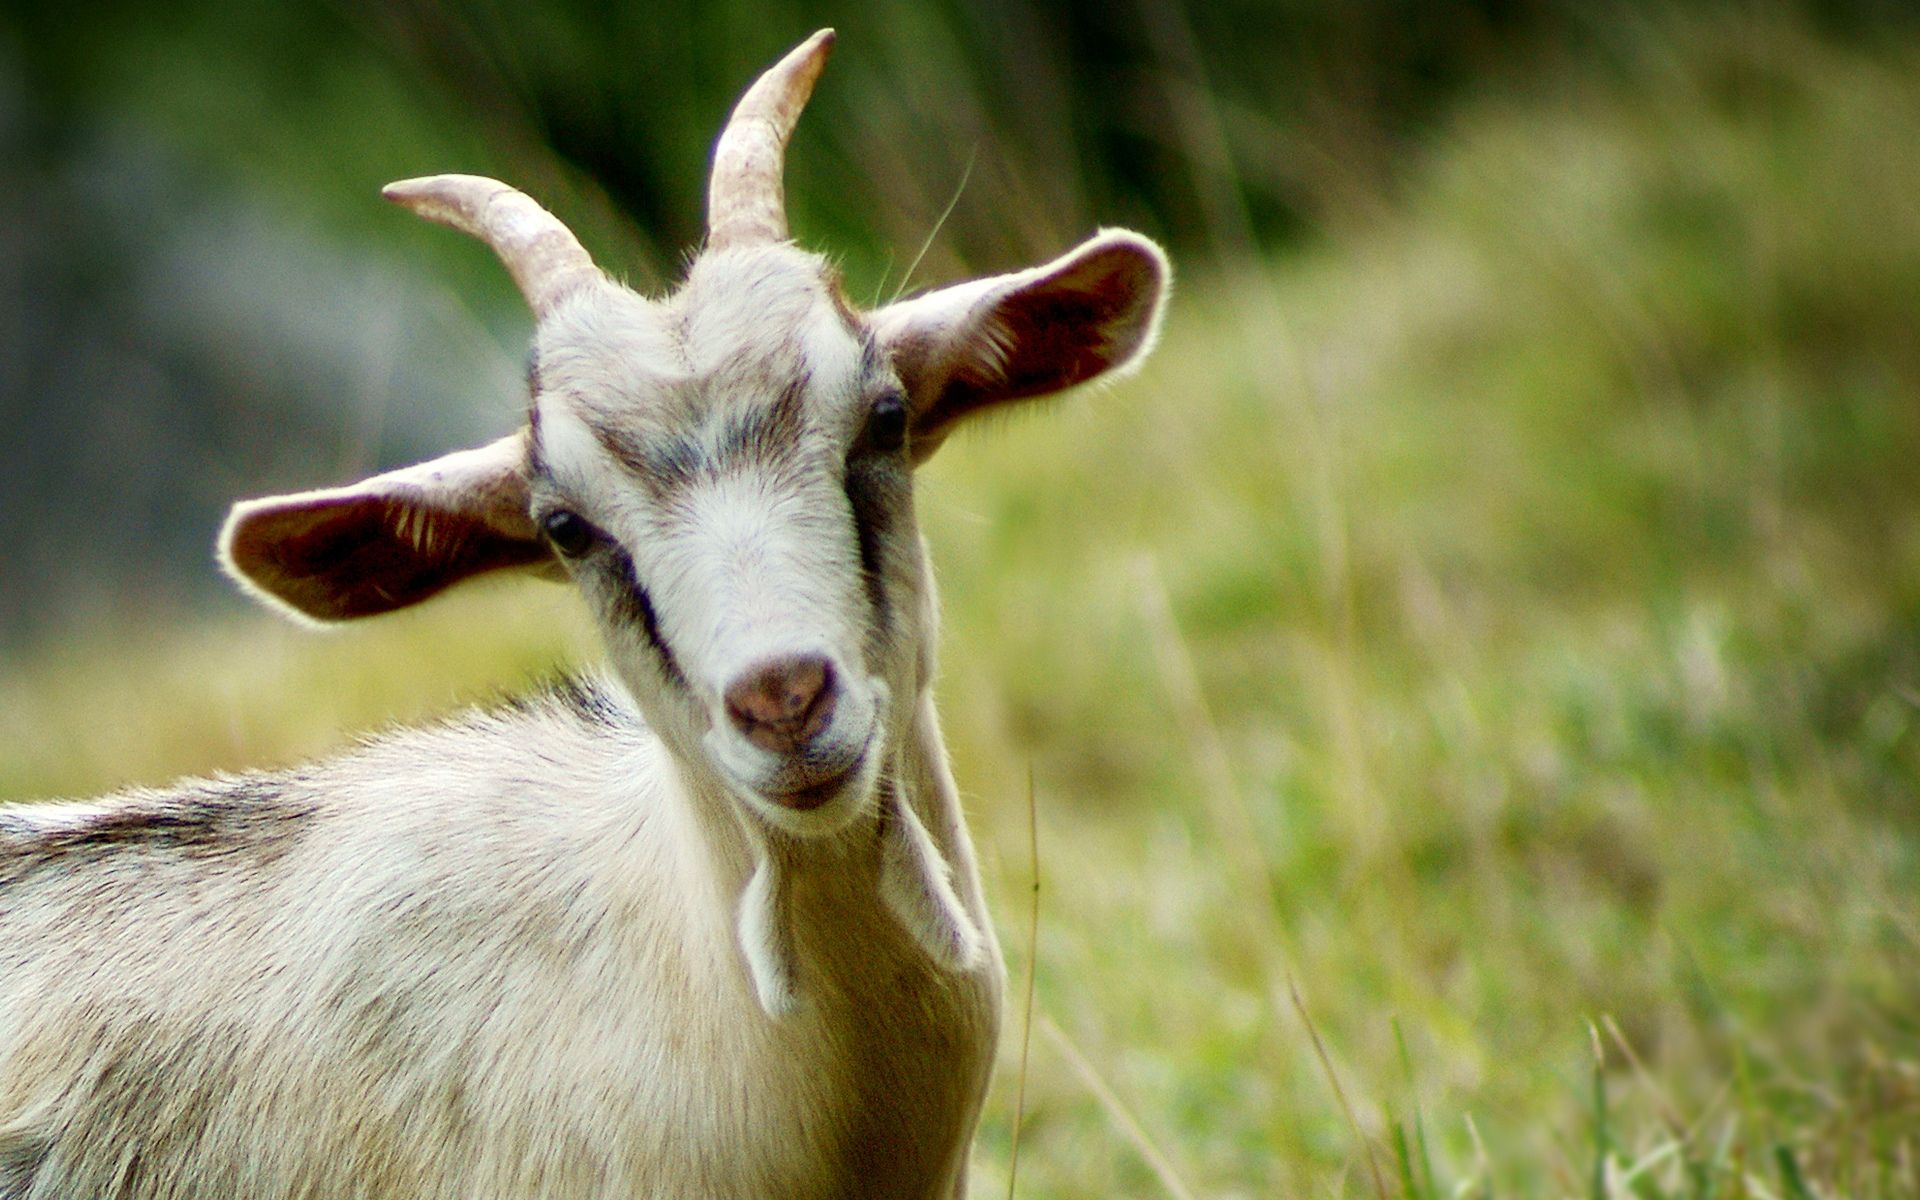 photos of goats. Beautiful Goat x 1200. Download. Close. Goats funny, Funny goat picture, G.o.a.t wallpaper